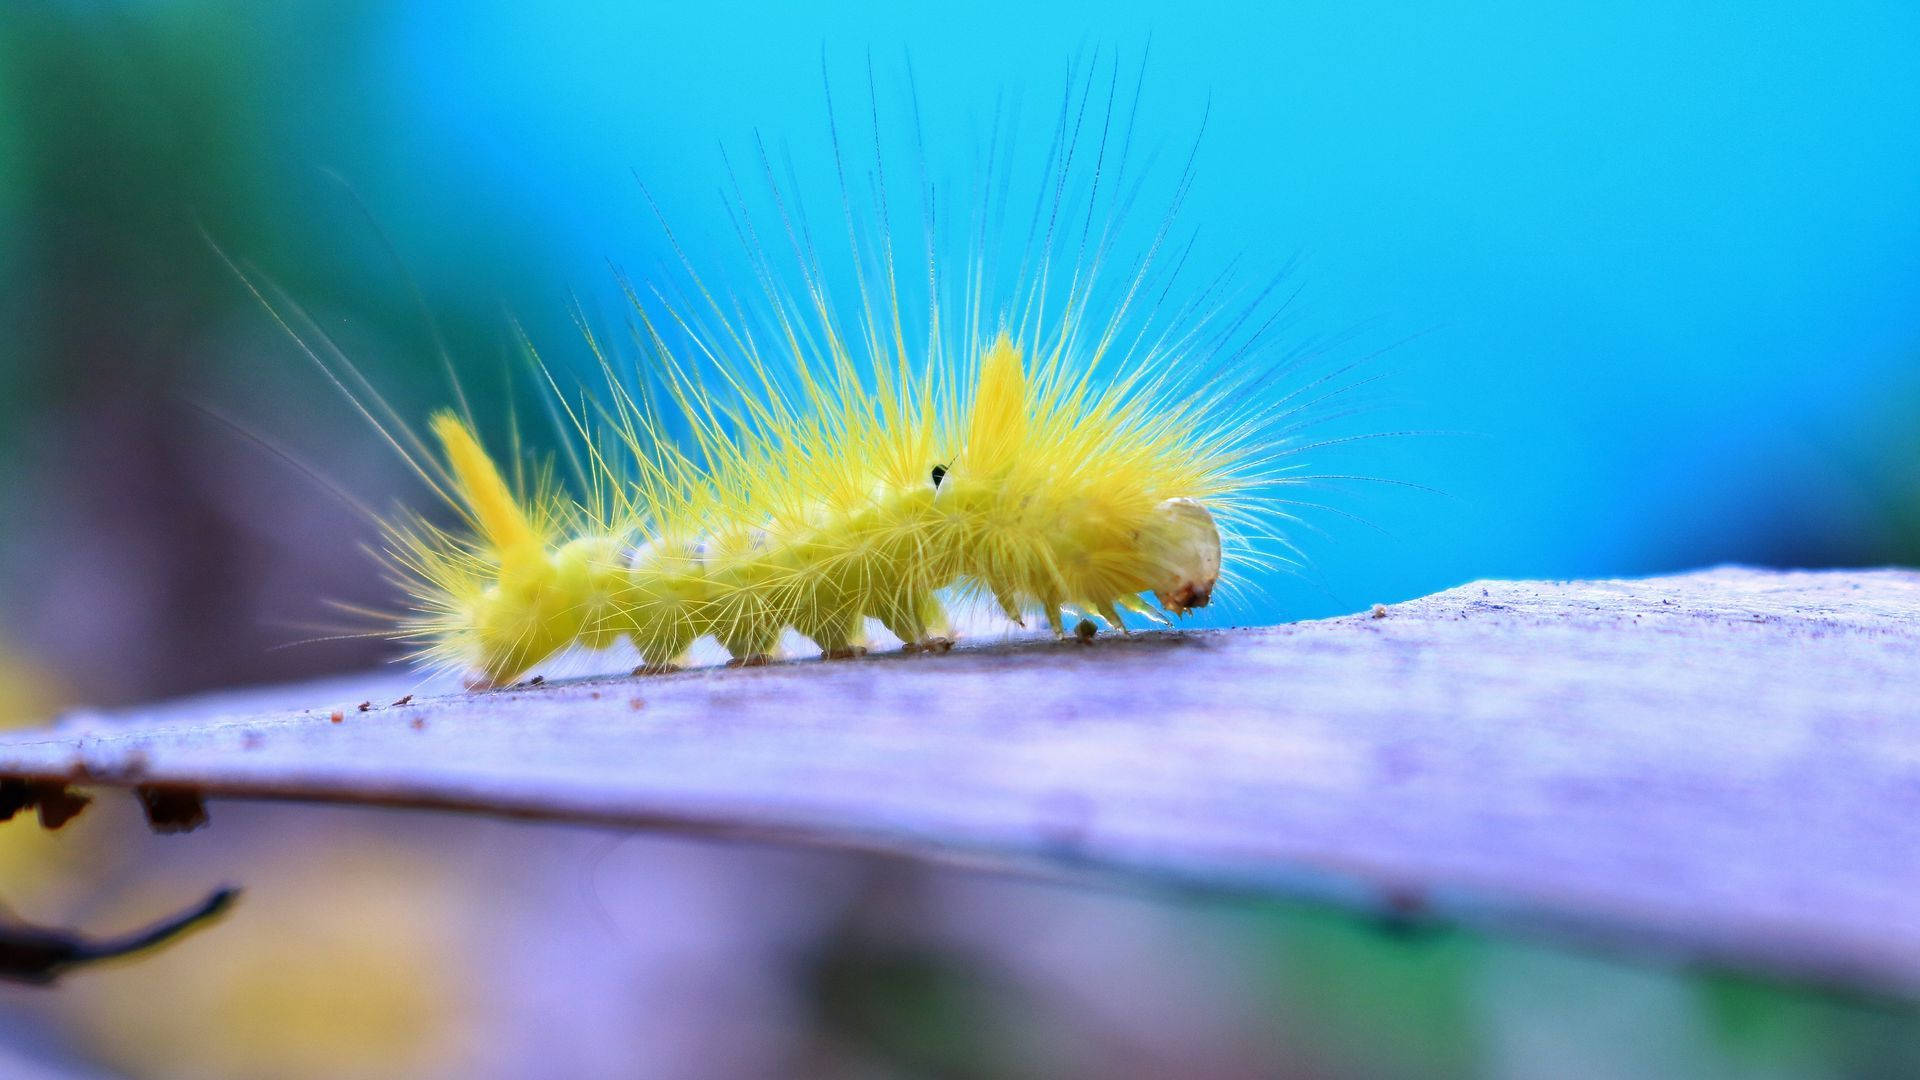 Long-Haired Yellow Caterpillar On Leaf Wallpaper